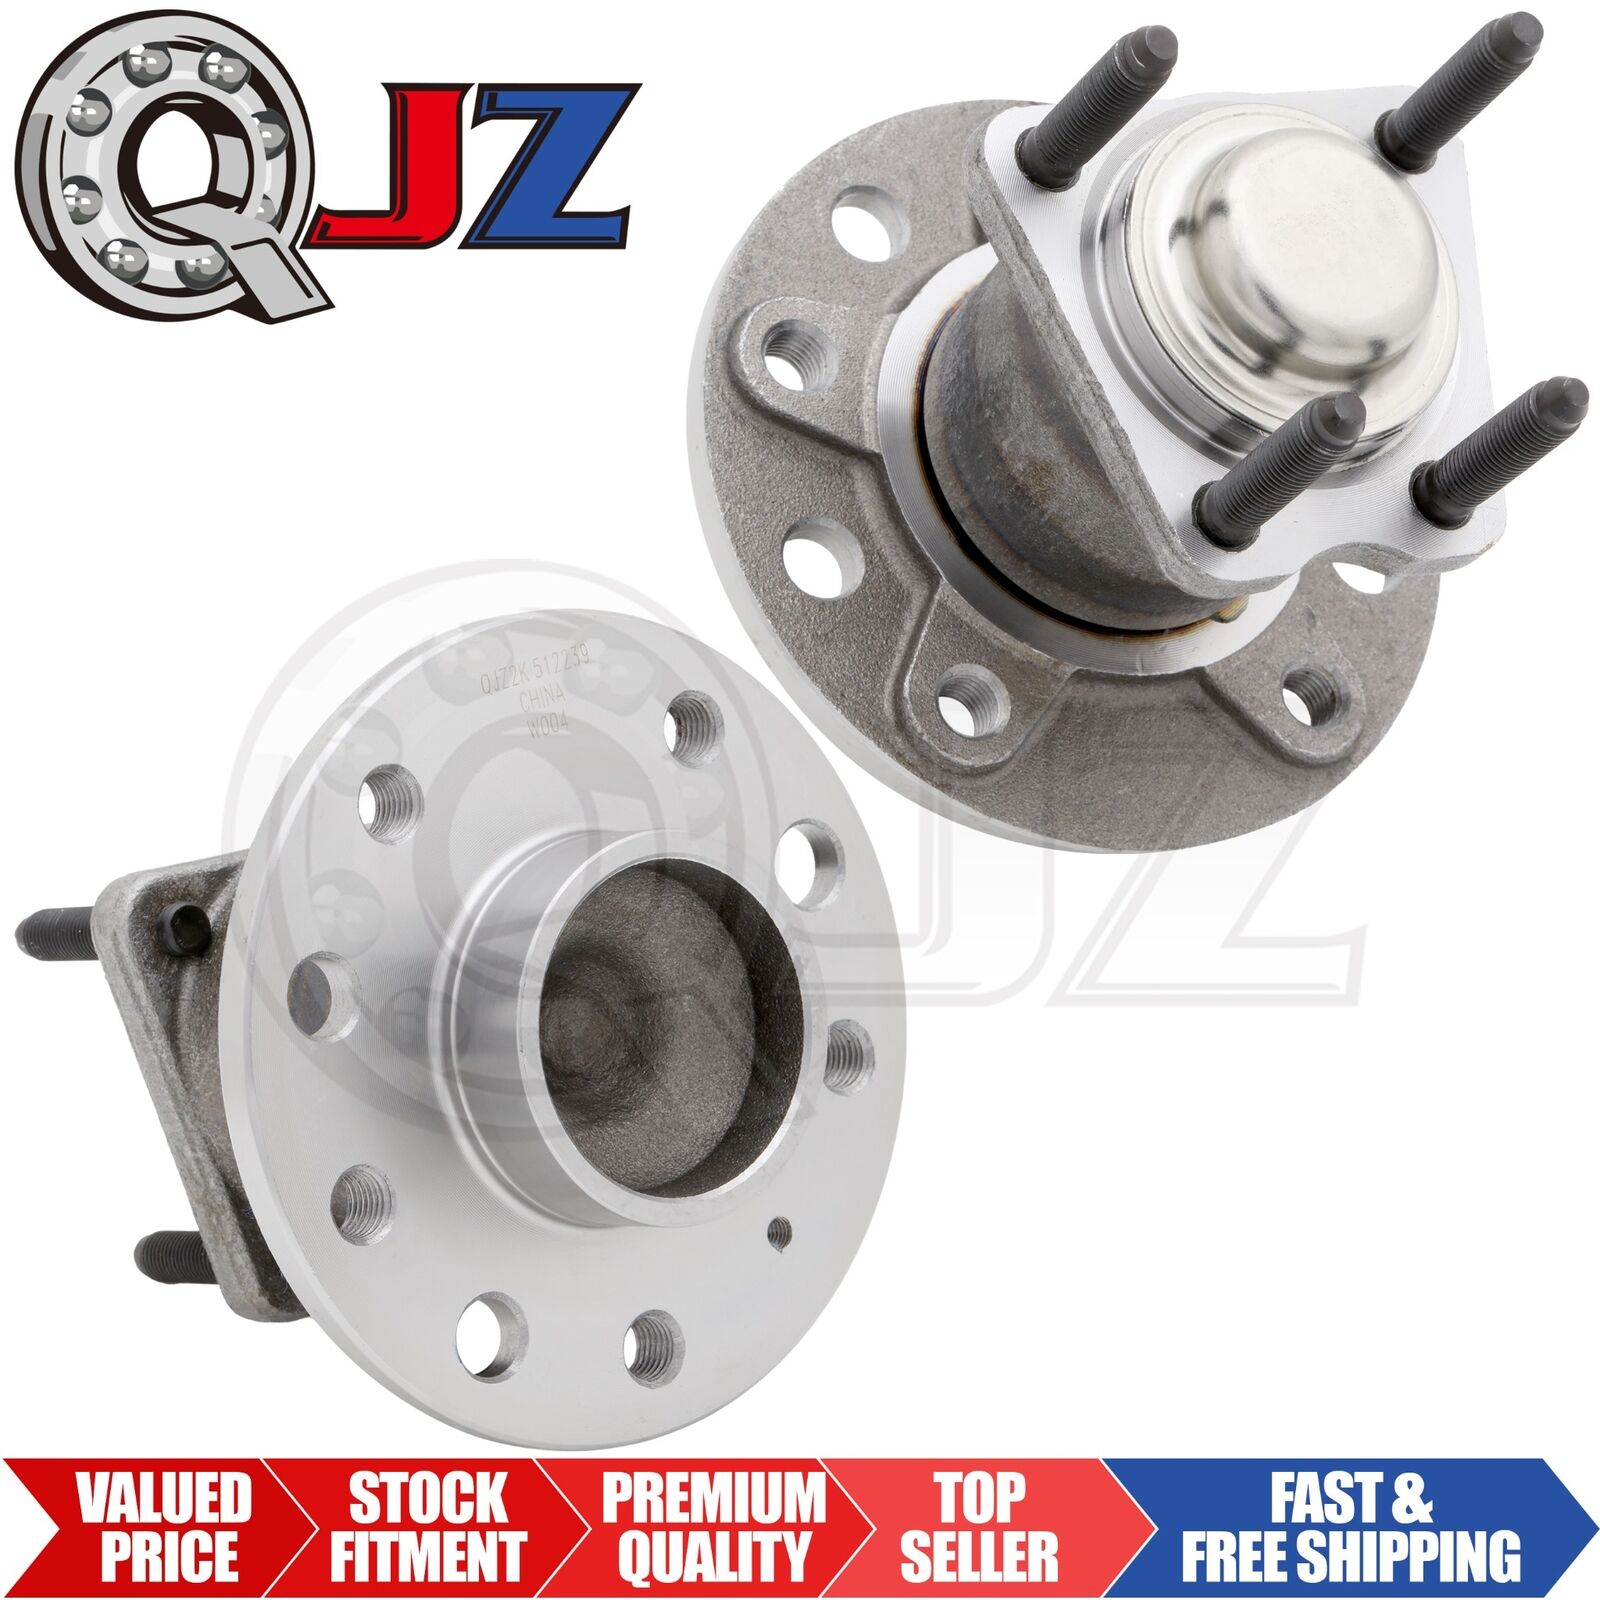 [REAR(Qty.2)] 512239 Wheel Hub Assembly for 2001-2003 Saturn LW200 Non-ABS FWD